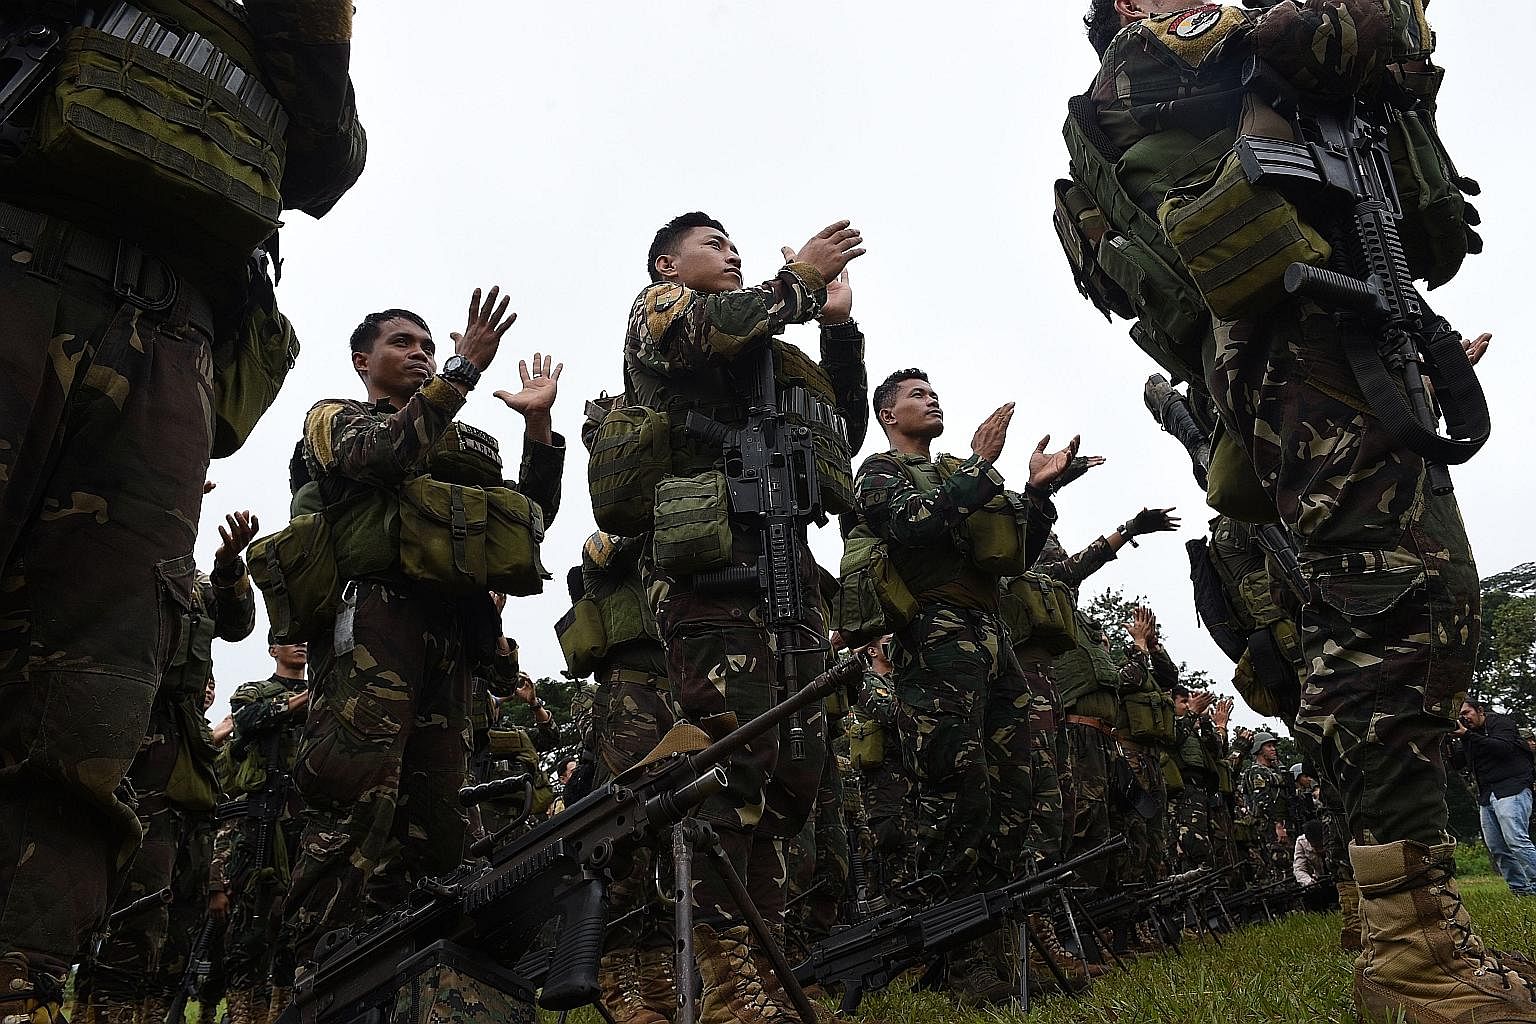 Philippine soldiers who fought against ISIS-affiliated militants applaud during their send-off ceremony inside a military camp in Marawi on the southern island of Mindanao yesterday. While the months-long siege of Marawi has effectively ended, the wa